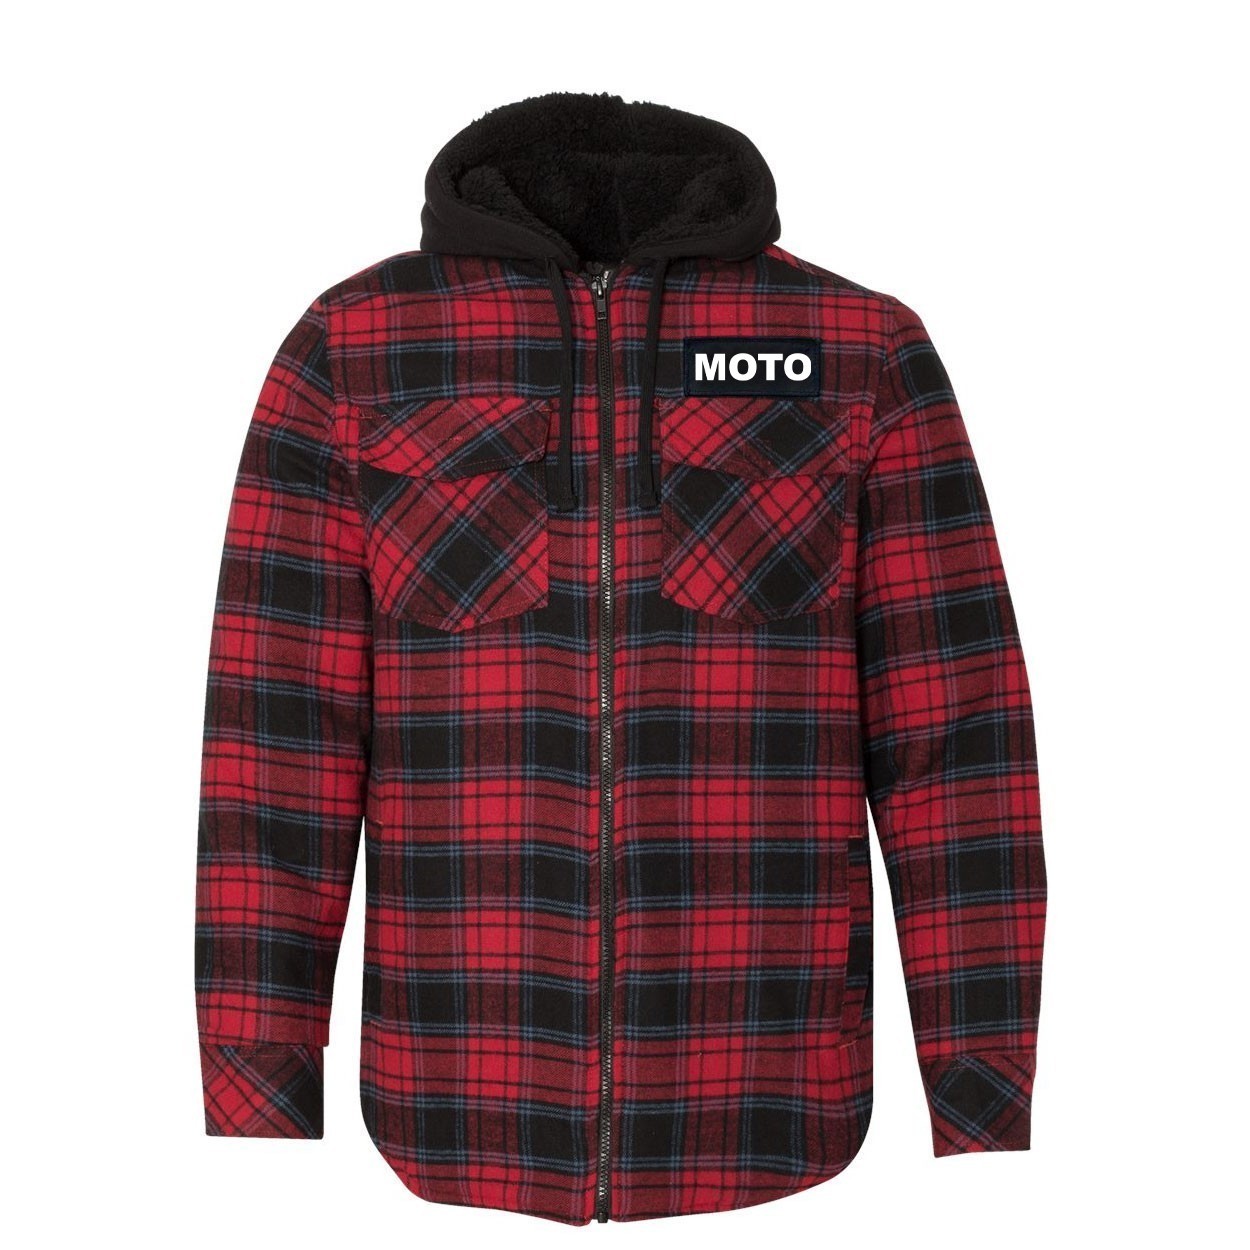 Moto Brand Logo Classic Unisex Full Zip Woven Patch Hooded Flannel Jacket Red/Black Buffalo